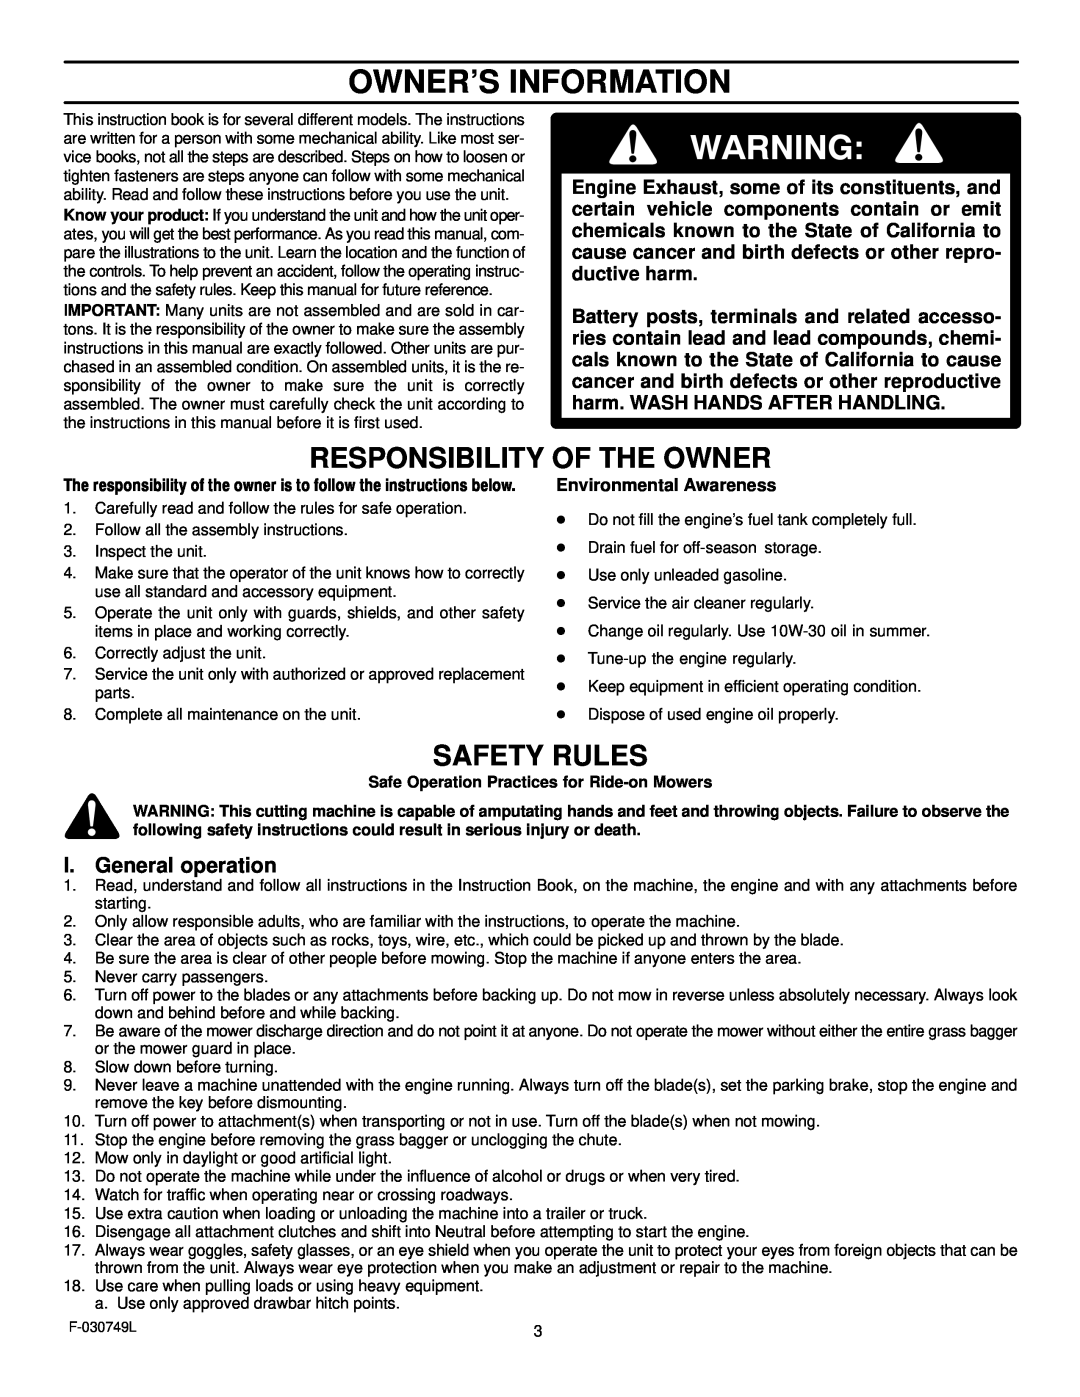 Murray 405030x48A manual Owner’S Information, Responsibility Of The Owner, Safety Rules, I. General operation 